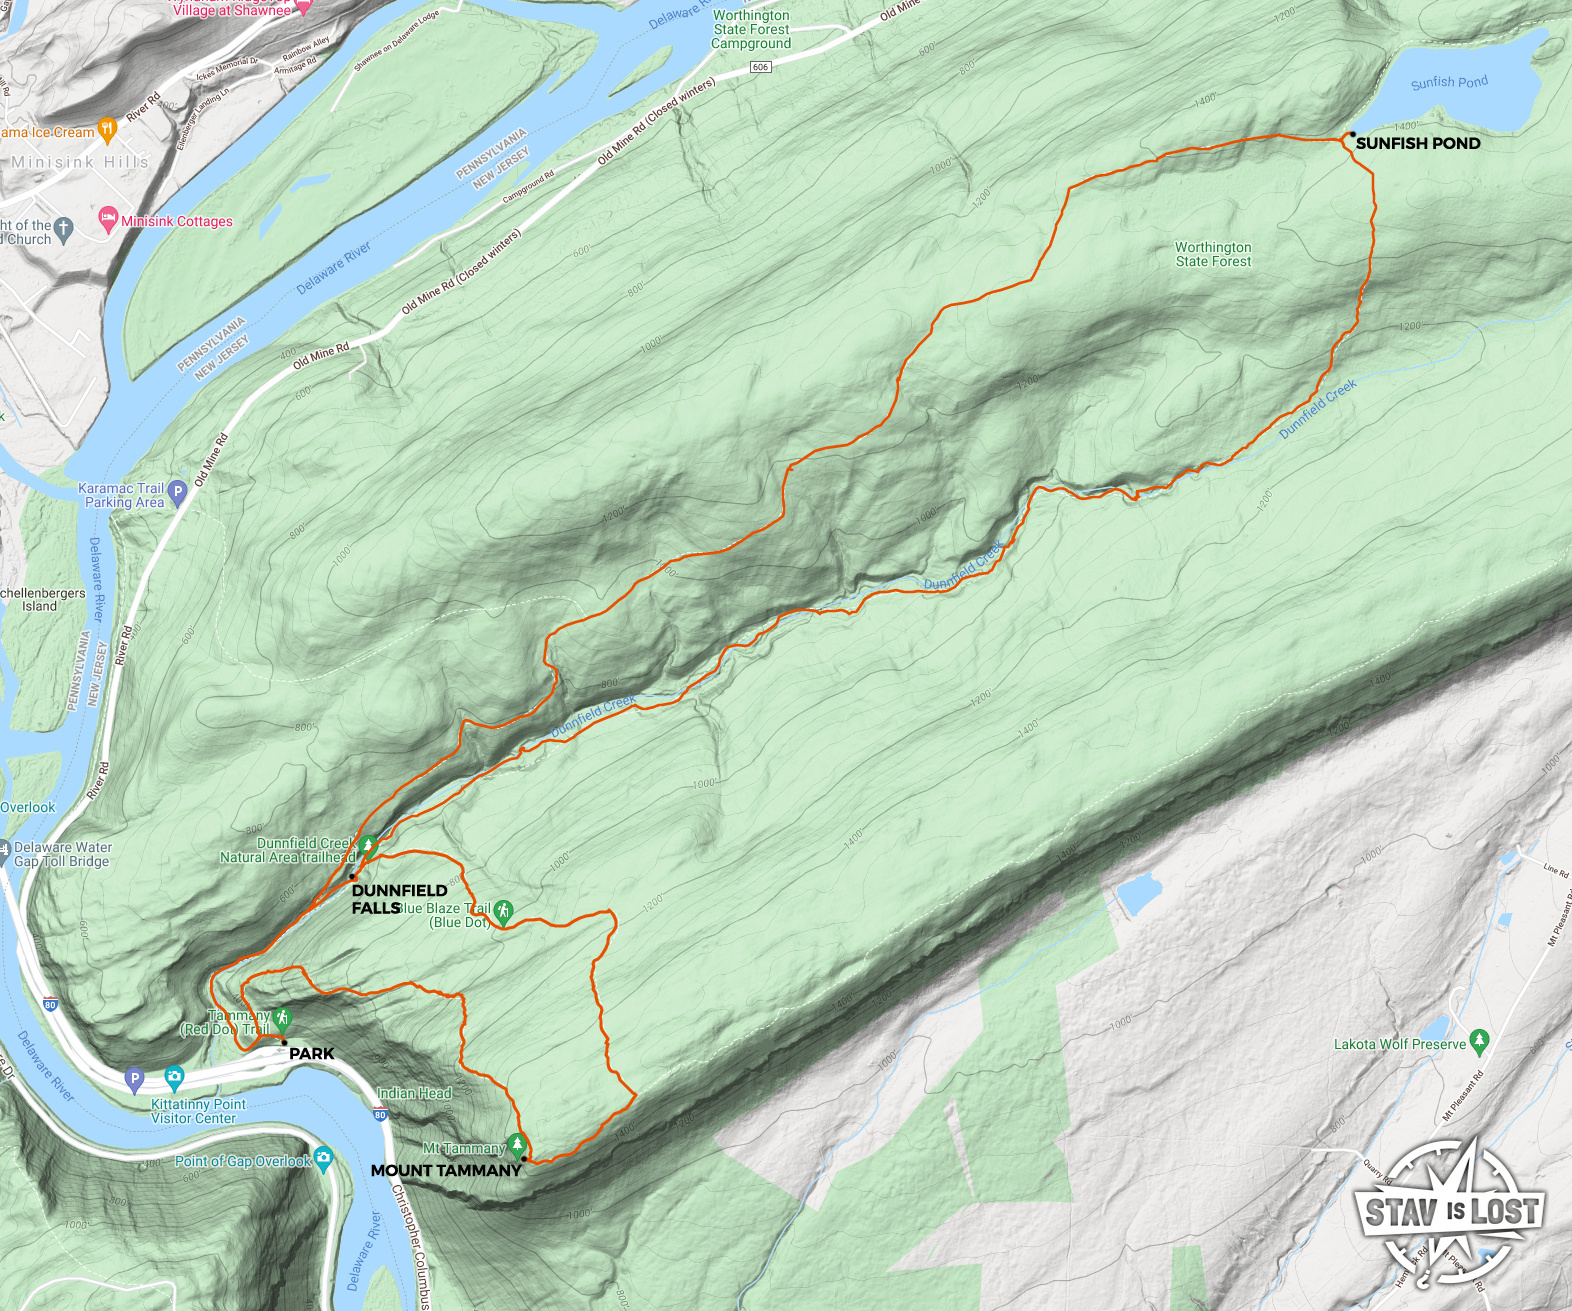 map for Mount Tammany, Sunfish Pond, Dunnfield Creek Loop by stav is lost